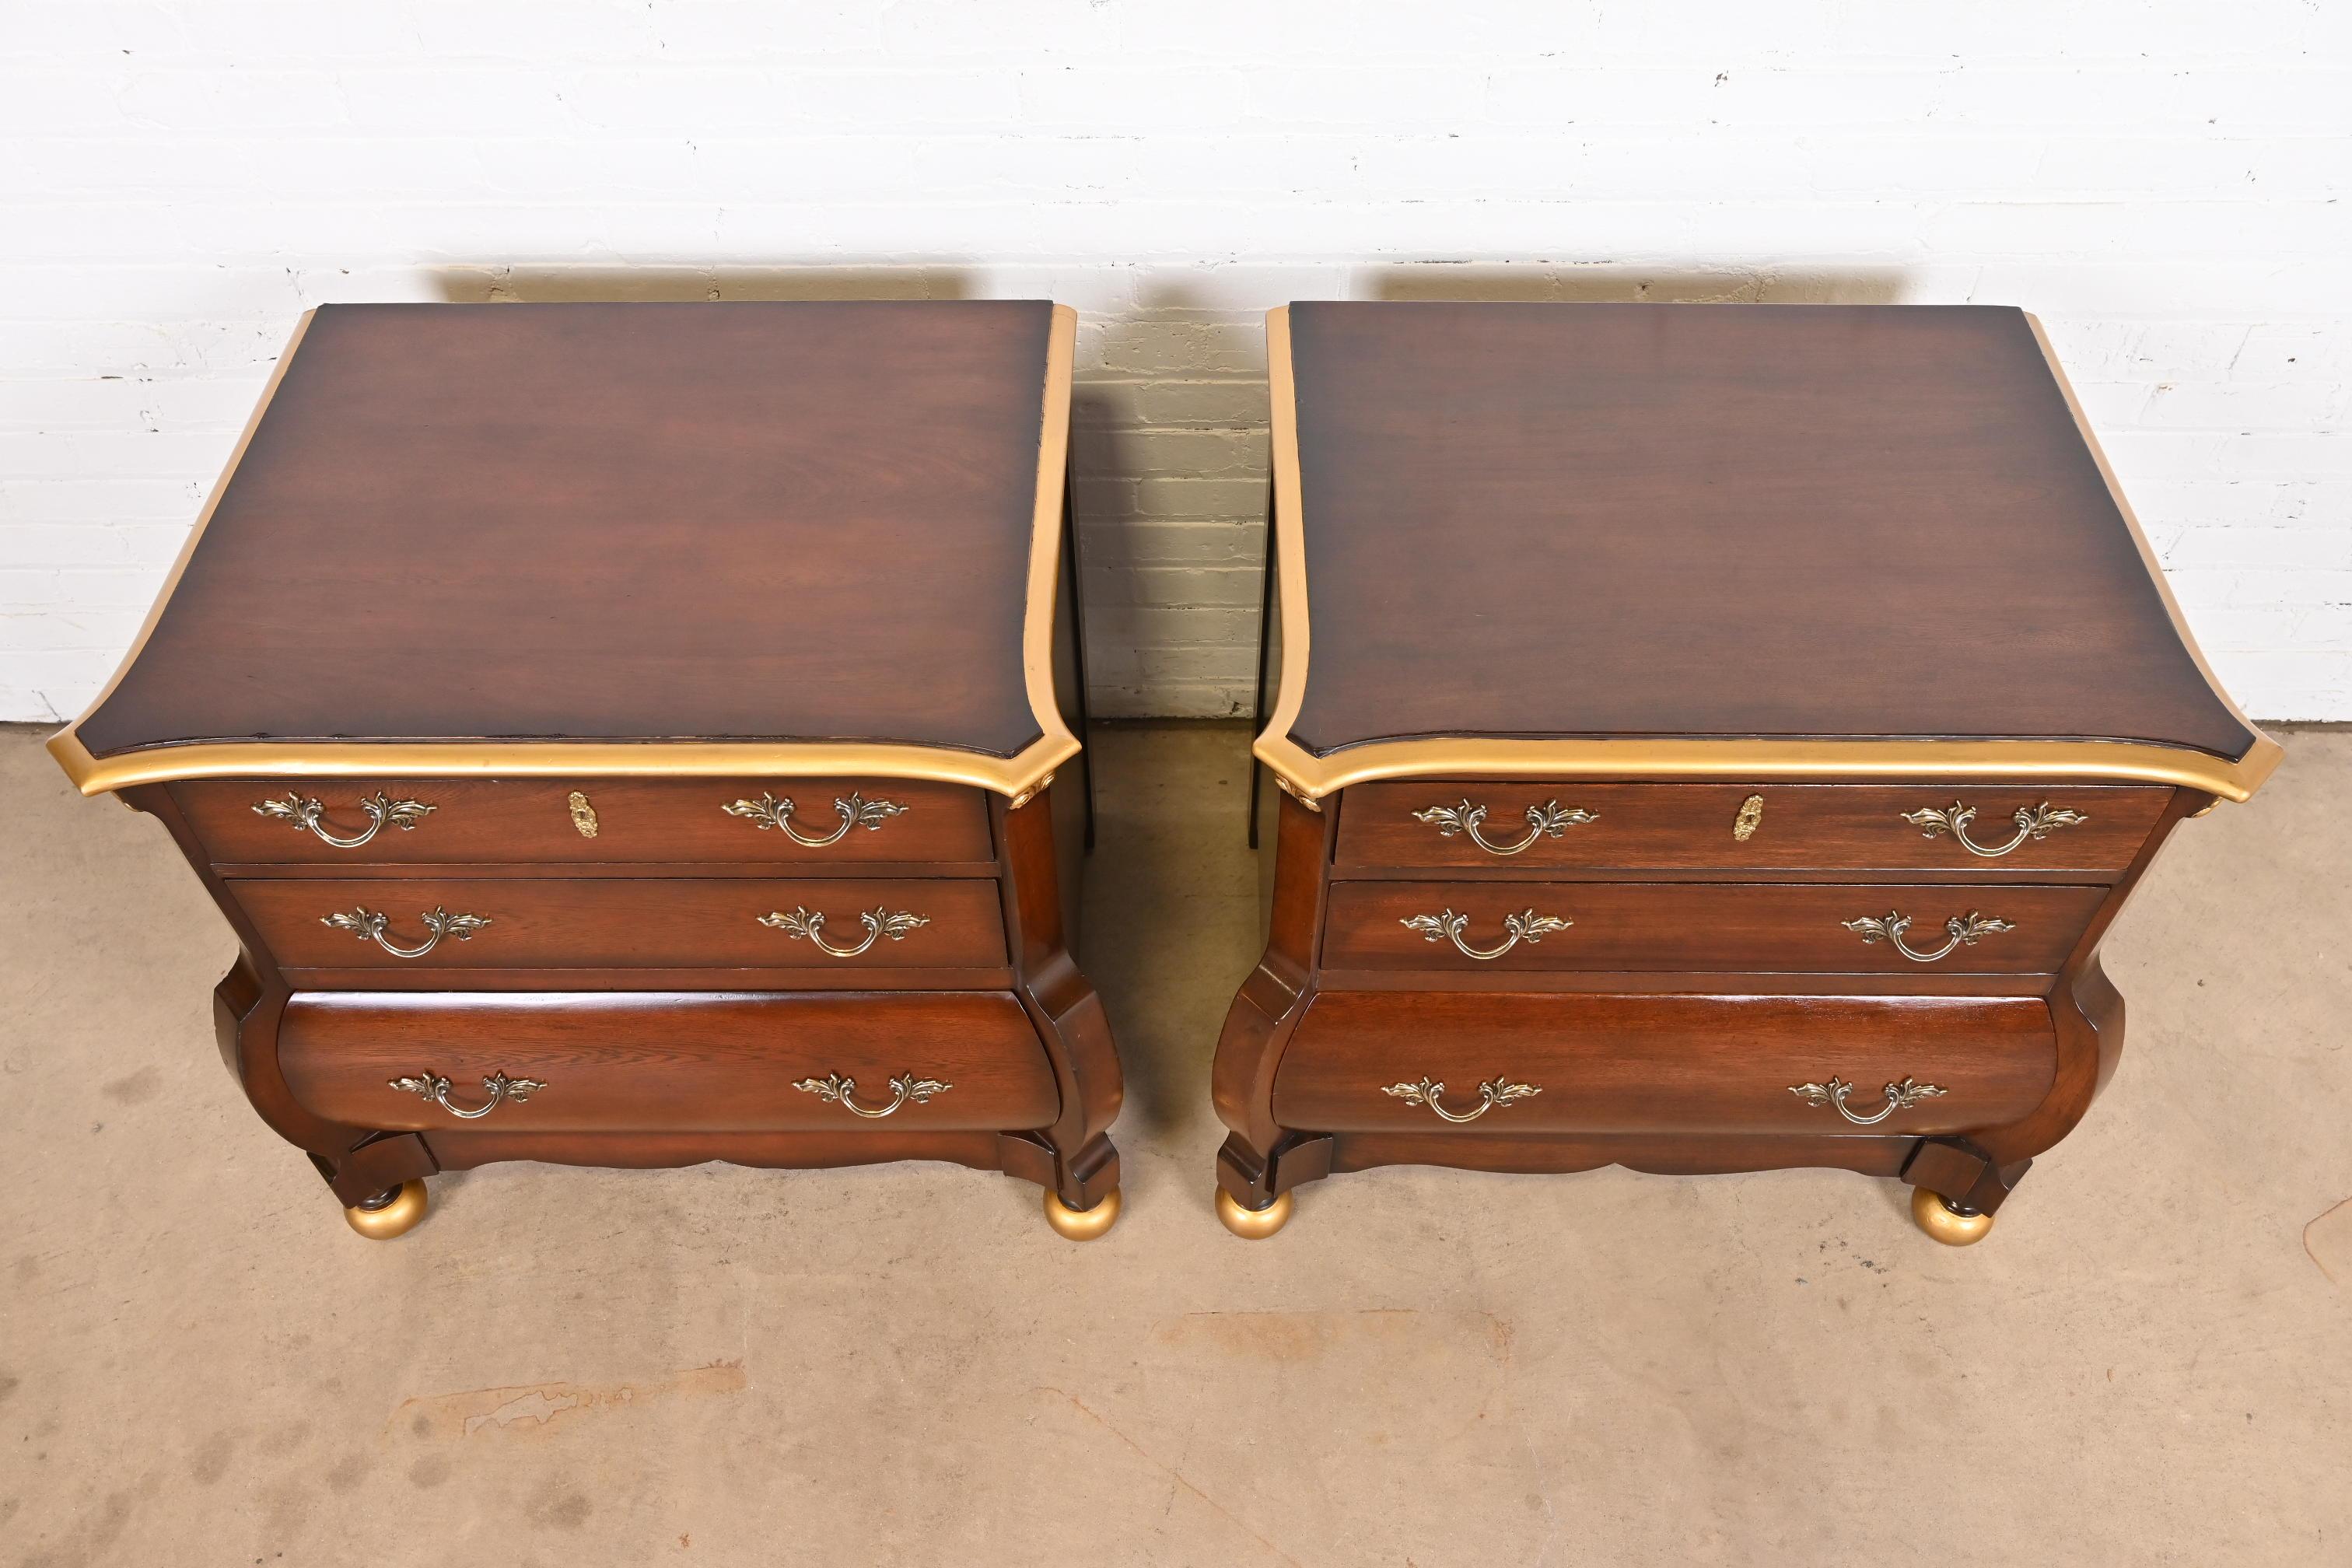 Ralph Lauren Italian Louis XV Mahogany Bombay Form Bedside Chests, Pair For Sale 4